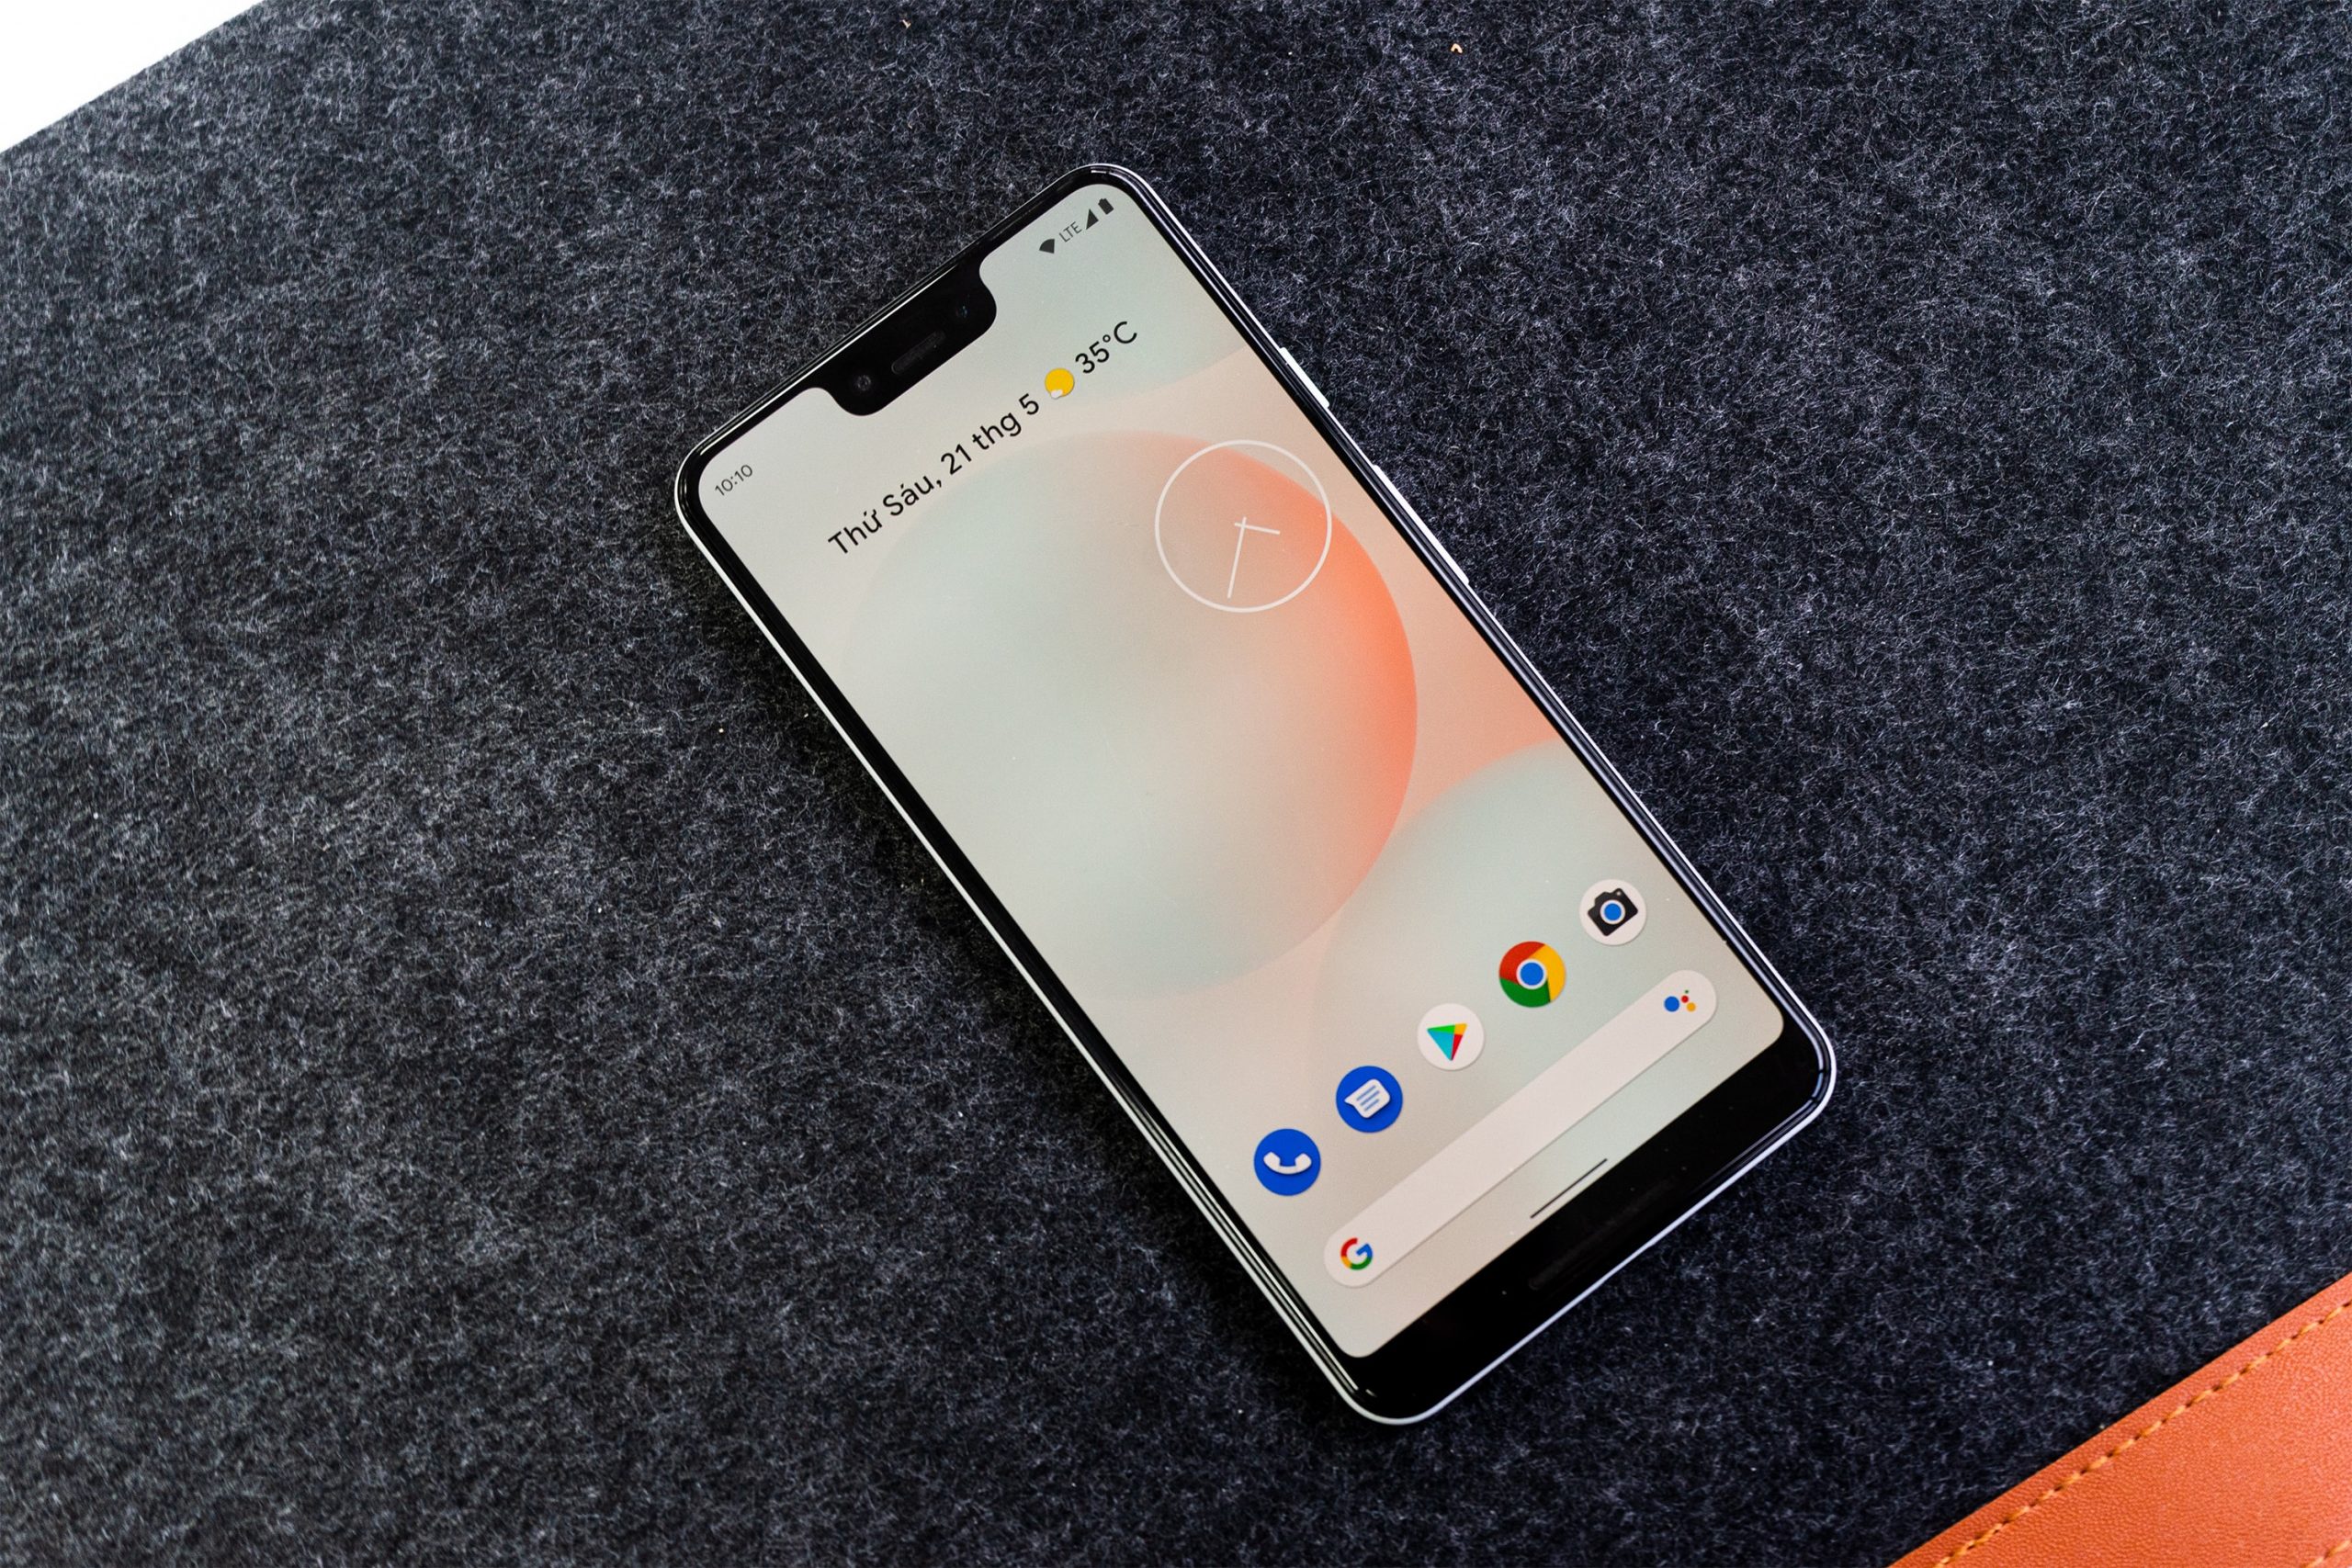 Google Pixel 3 XL review: Winning the game by rewriting the rules